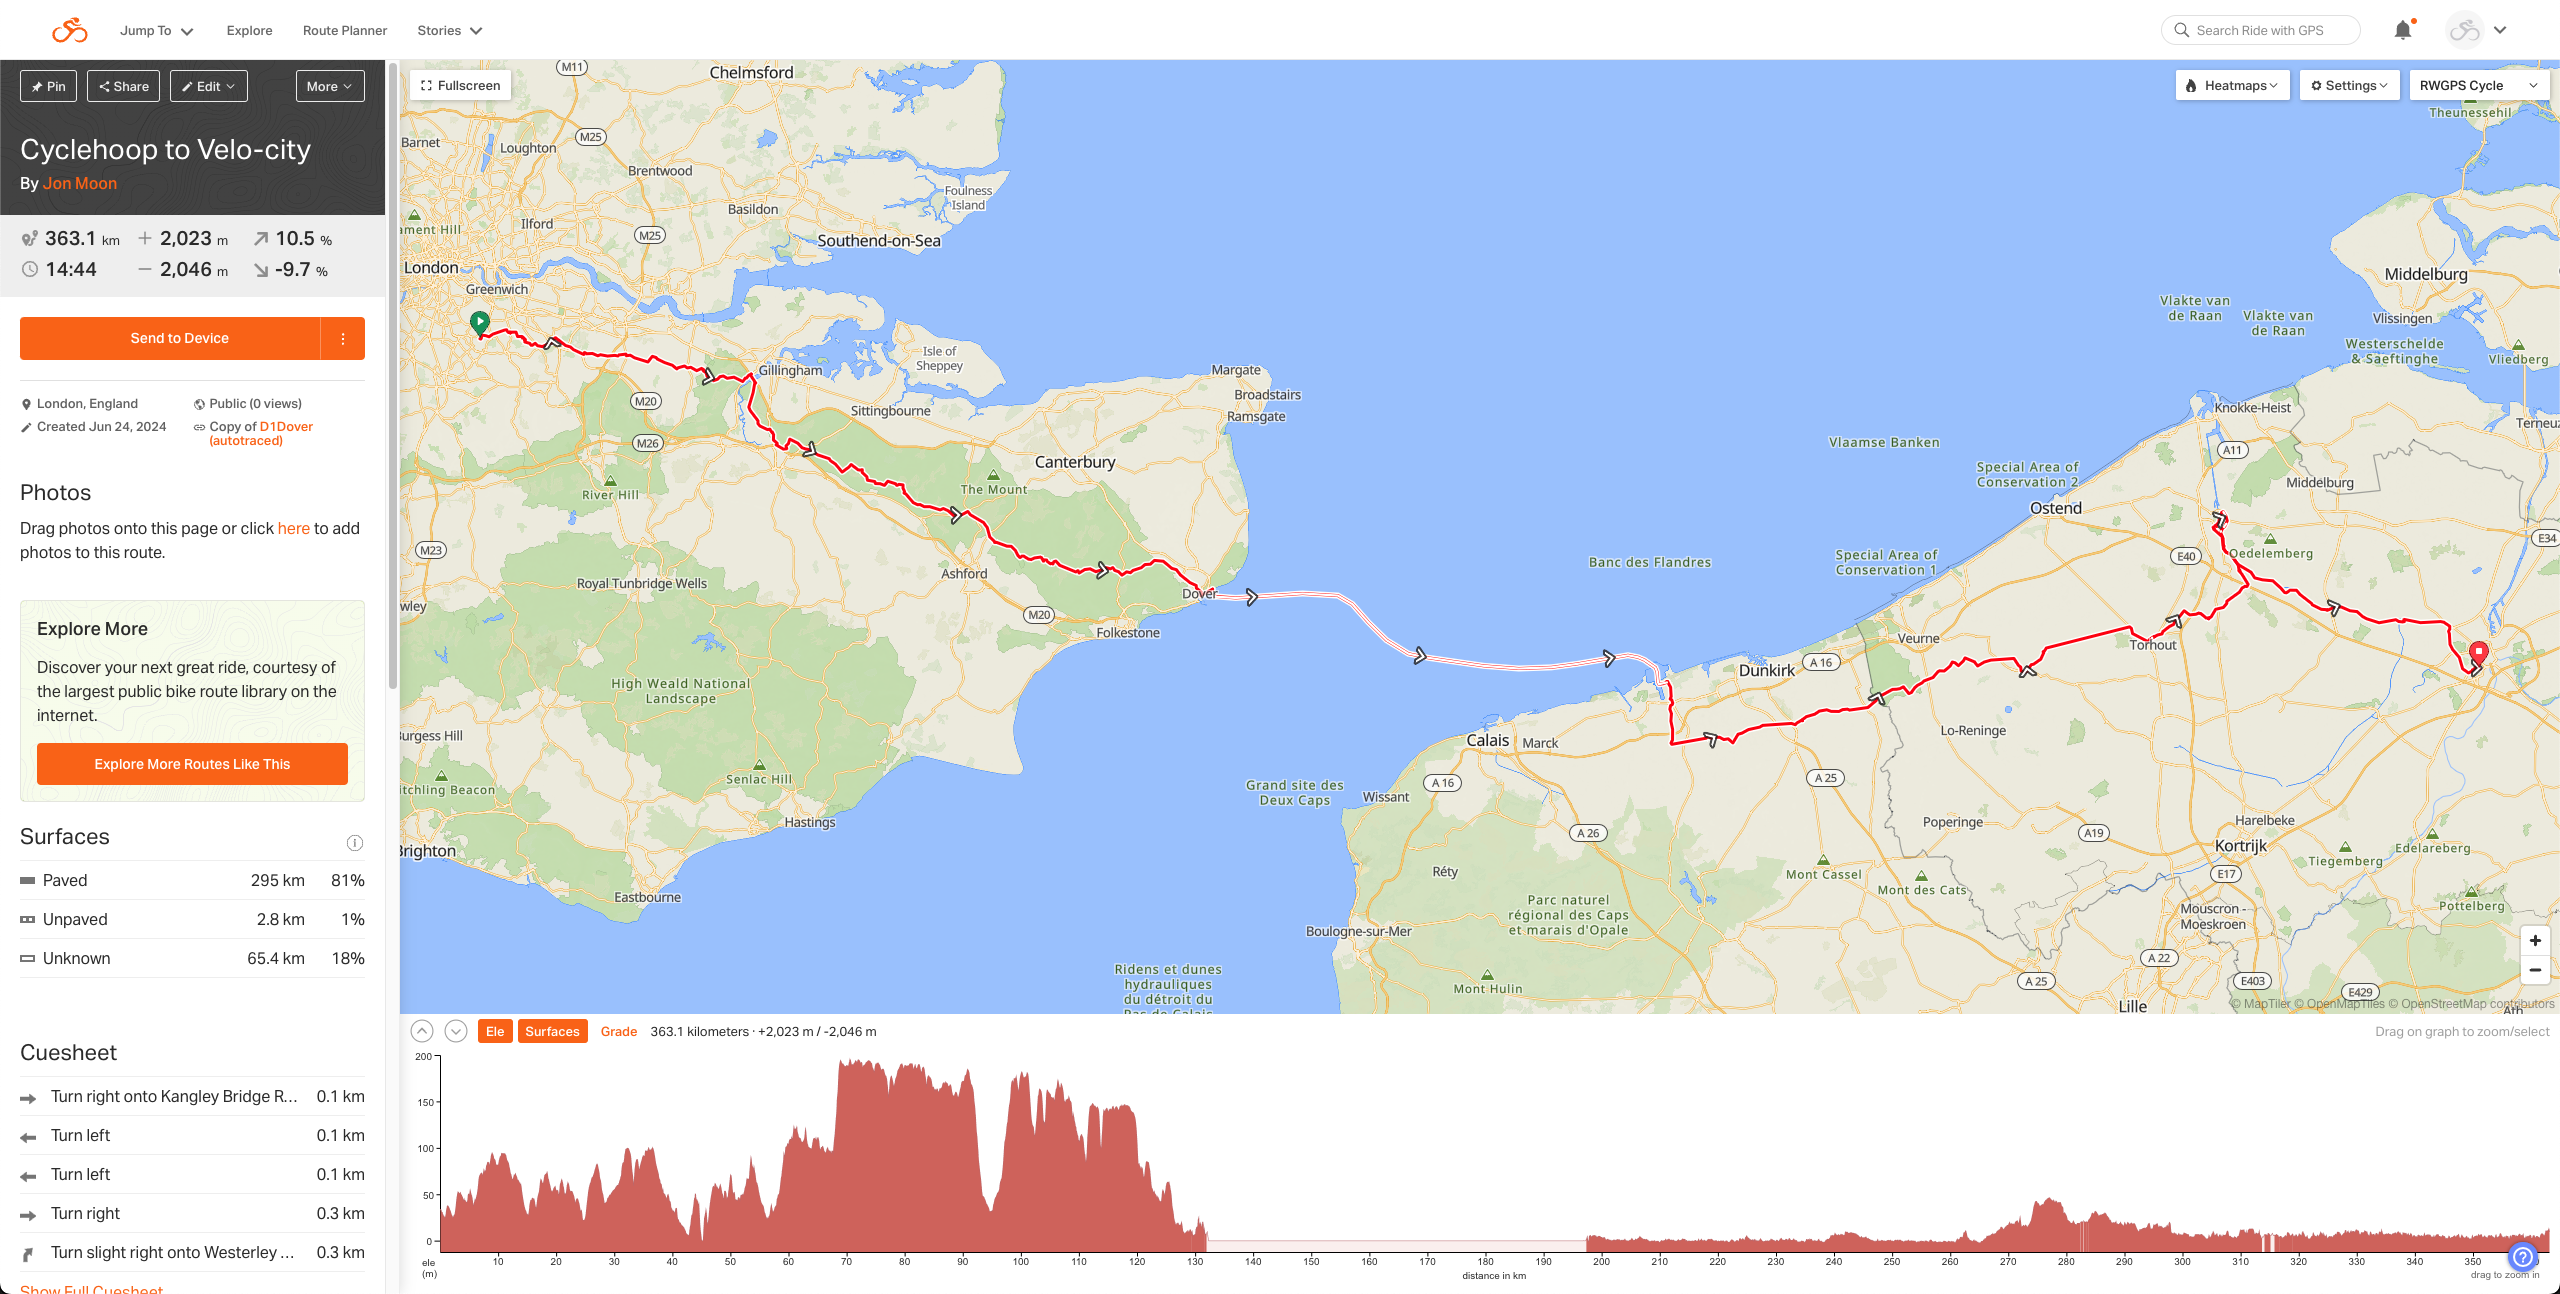 a map of the route from the cyclehoop office to ghent in belgium